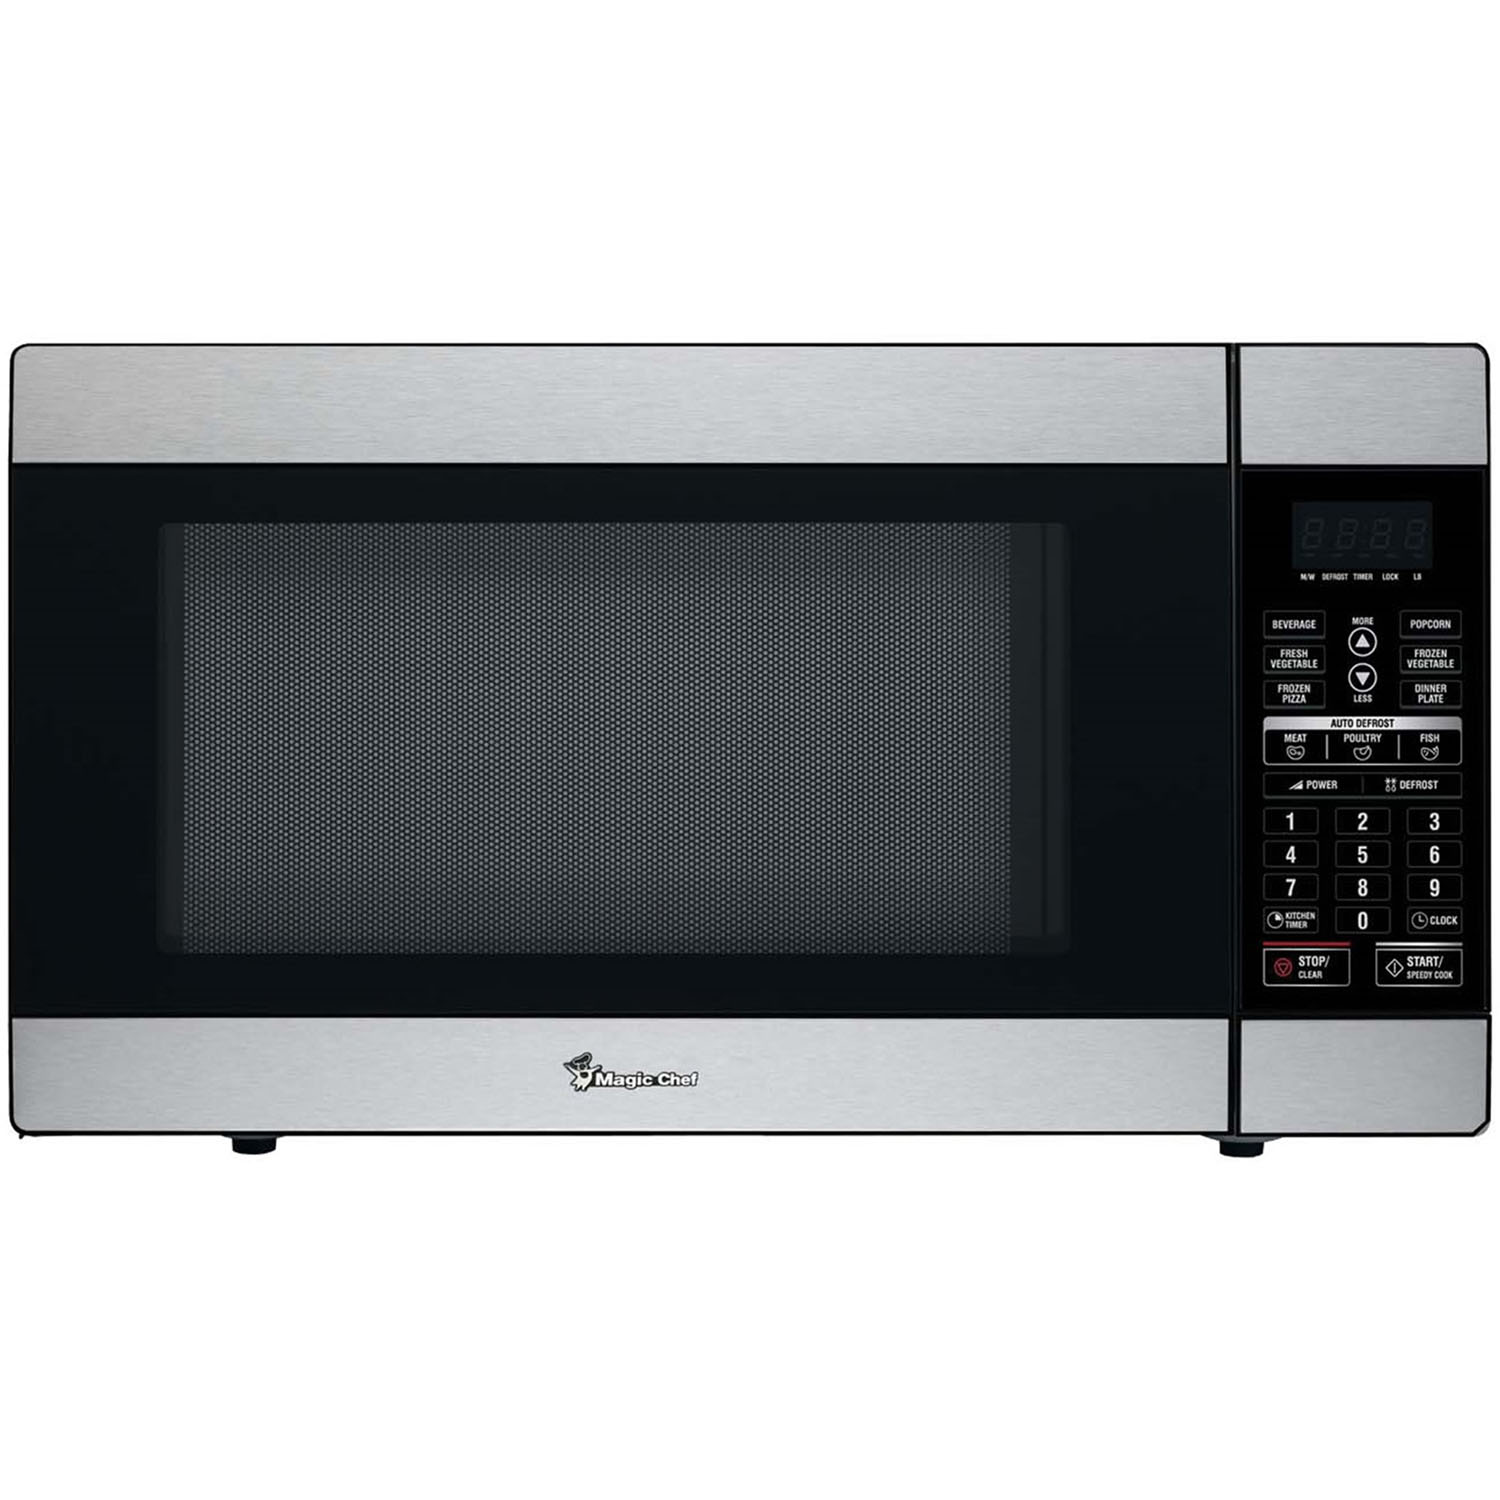 Magic Chef 1.8 Cu. Ft. 1100W Countertop Microwave Oven in Stainless Steel - image 1 of 3